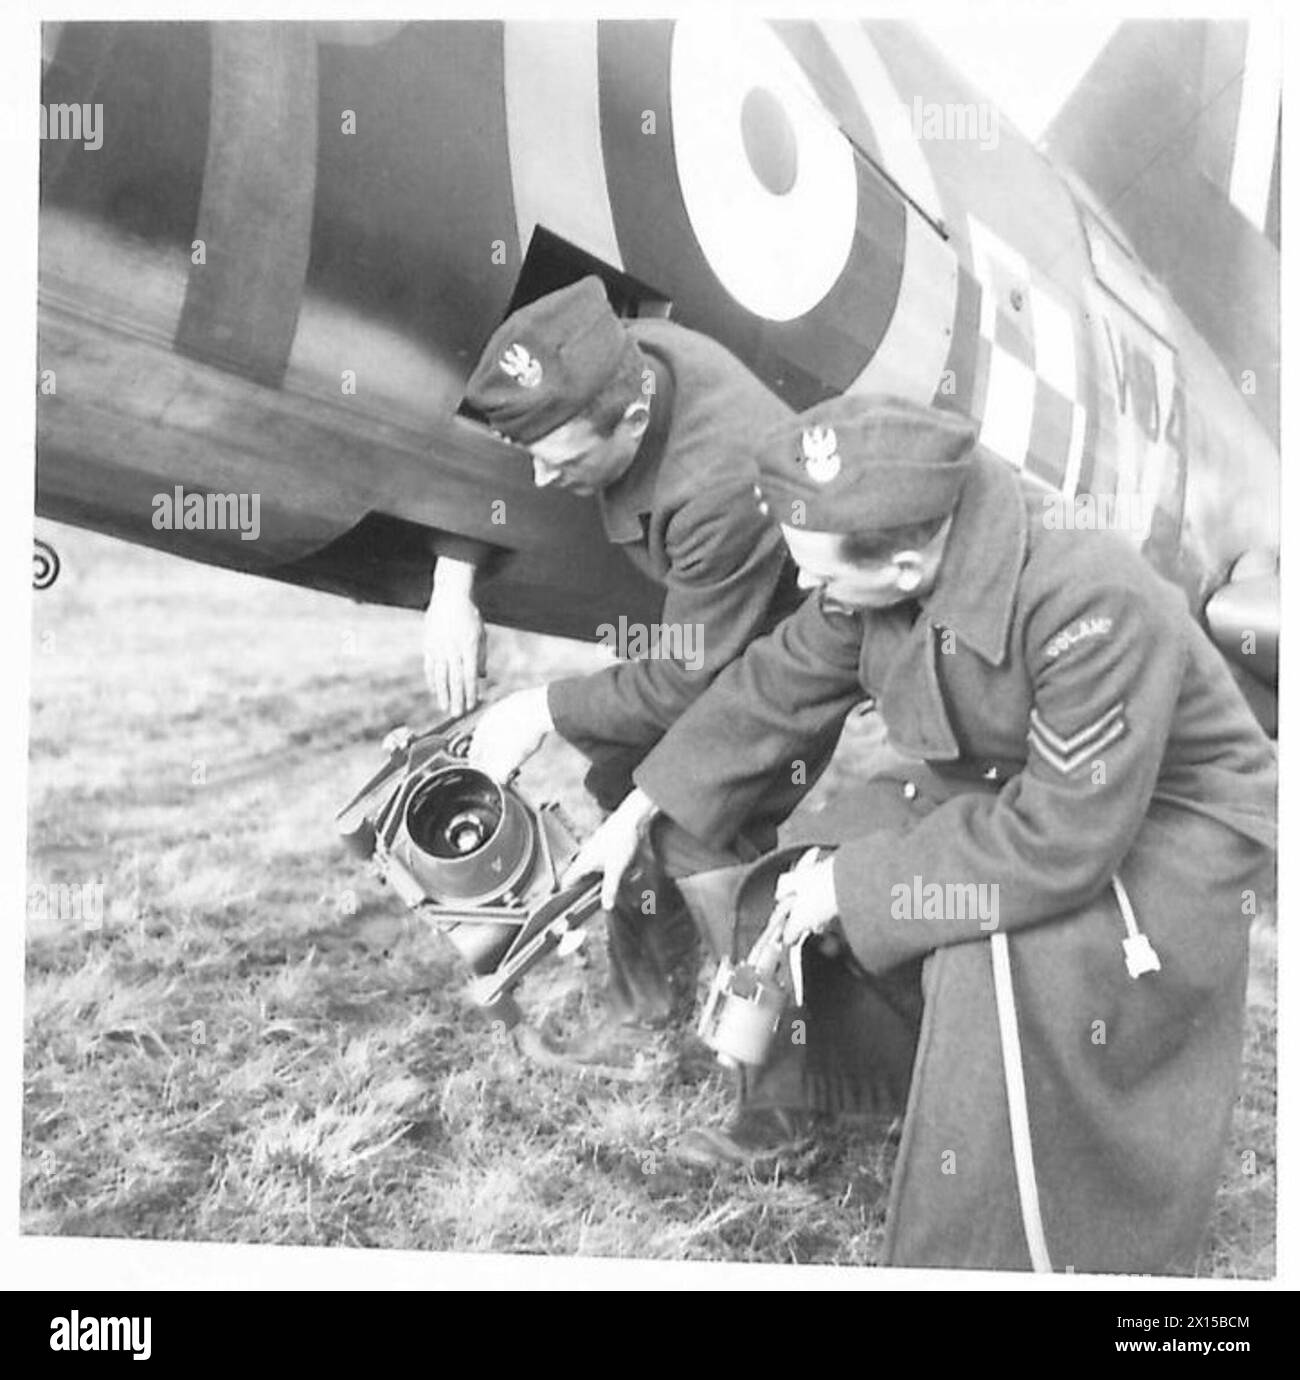 THE POLISH AIR FORCE IN BRITAIN, 1940-1947 - Ground crew remove a Type F.24 camera from Westland Lysander Mark IIIA, V9437 'AR-V', of No. 309 Polish Fighter-Reconnaissance Squadron (part of the RAF Army Cooperation Command), at Dunino, Fife, following a photo reconnaissance sortie Polish Air Force, Polish Air Force, 309 'Land of Czerwień' Fighter-Reconnaissance Squadron, Royal Air Force, Station, Calveley Stock Photo